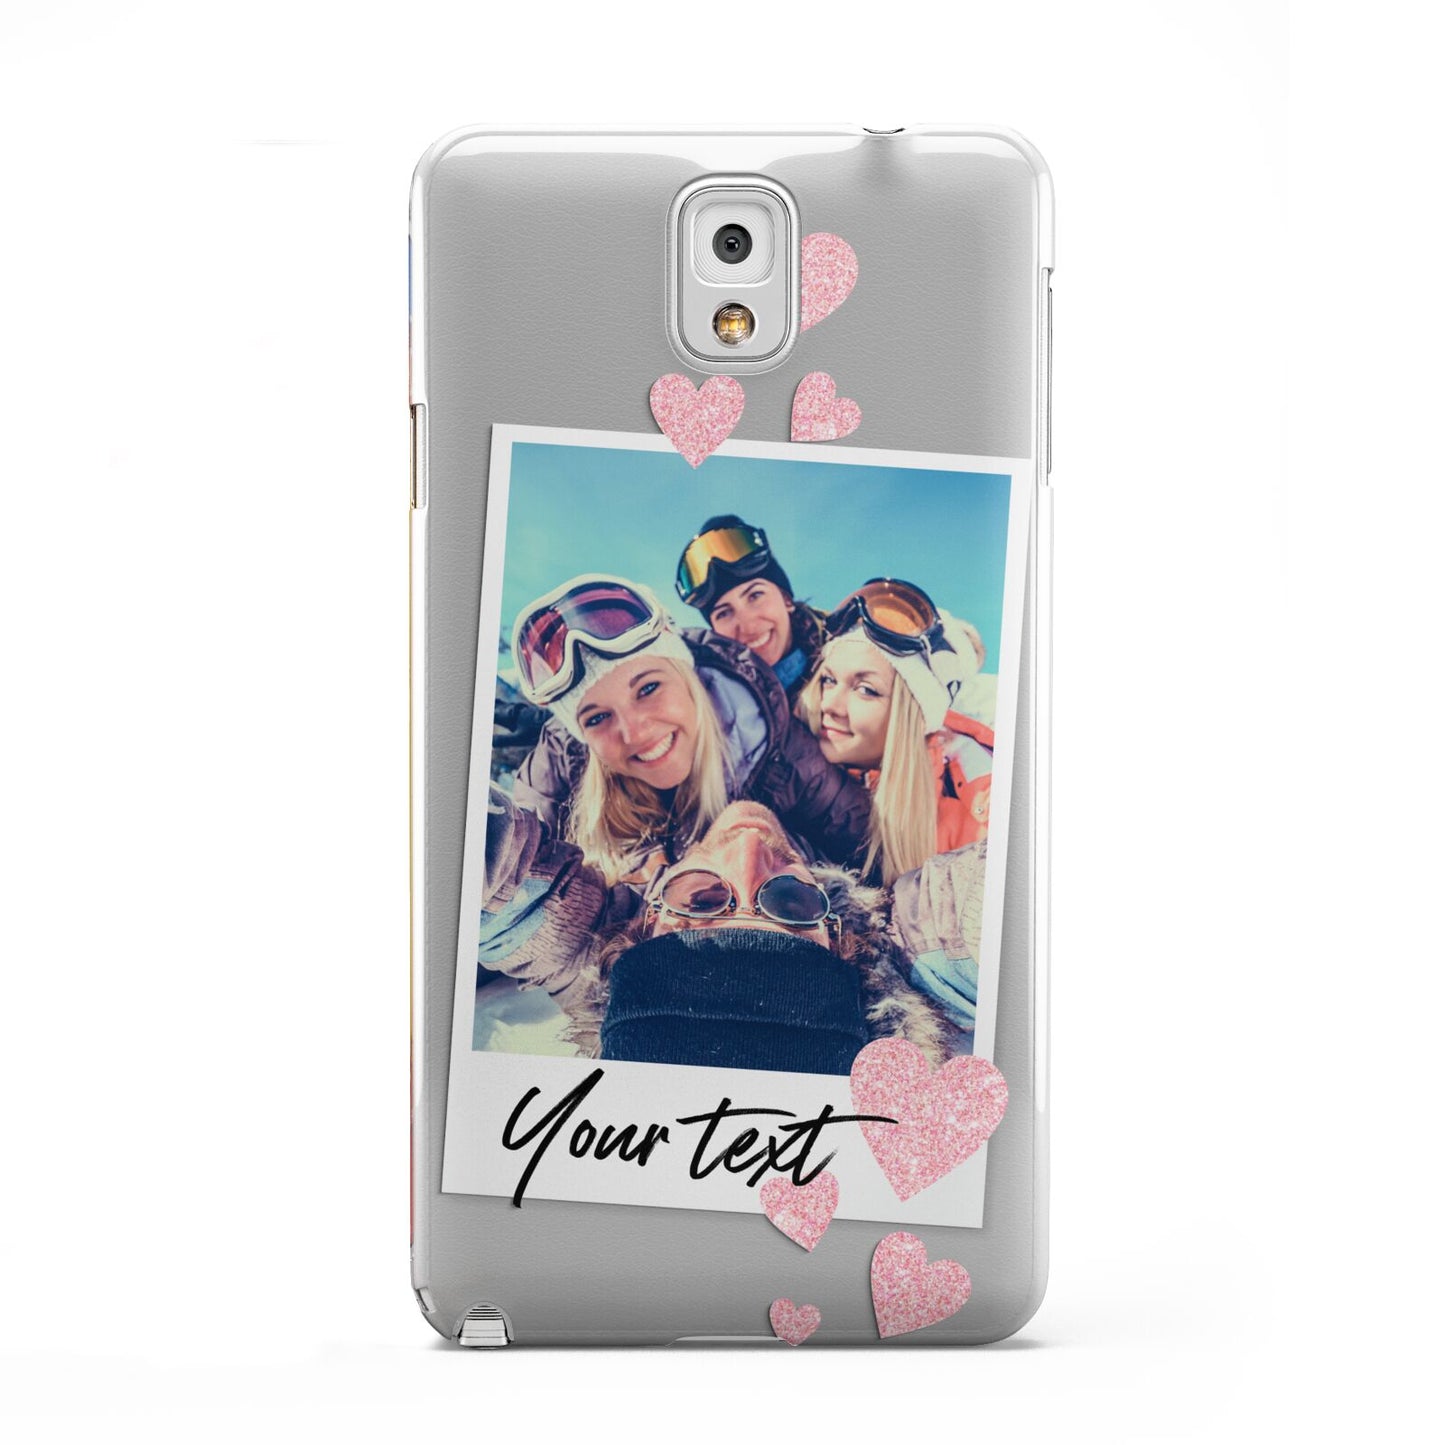 Photo with Text Samsung Galaxy Note 3 Case